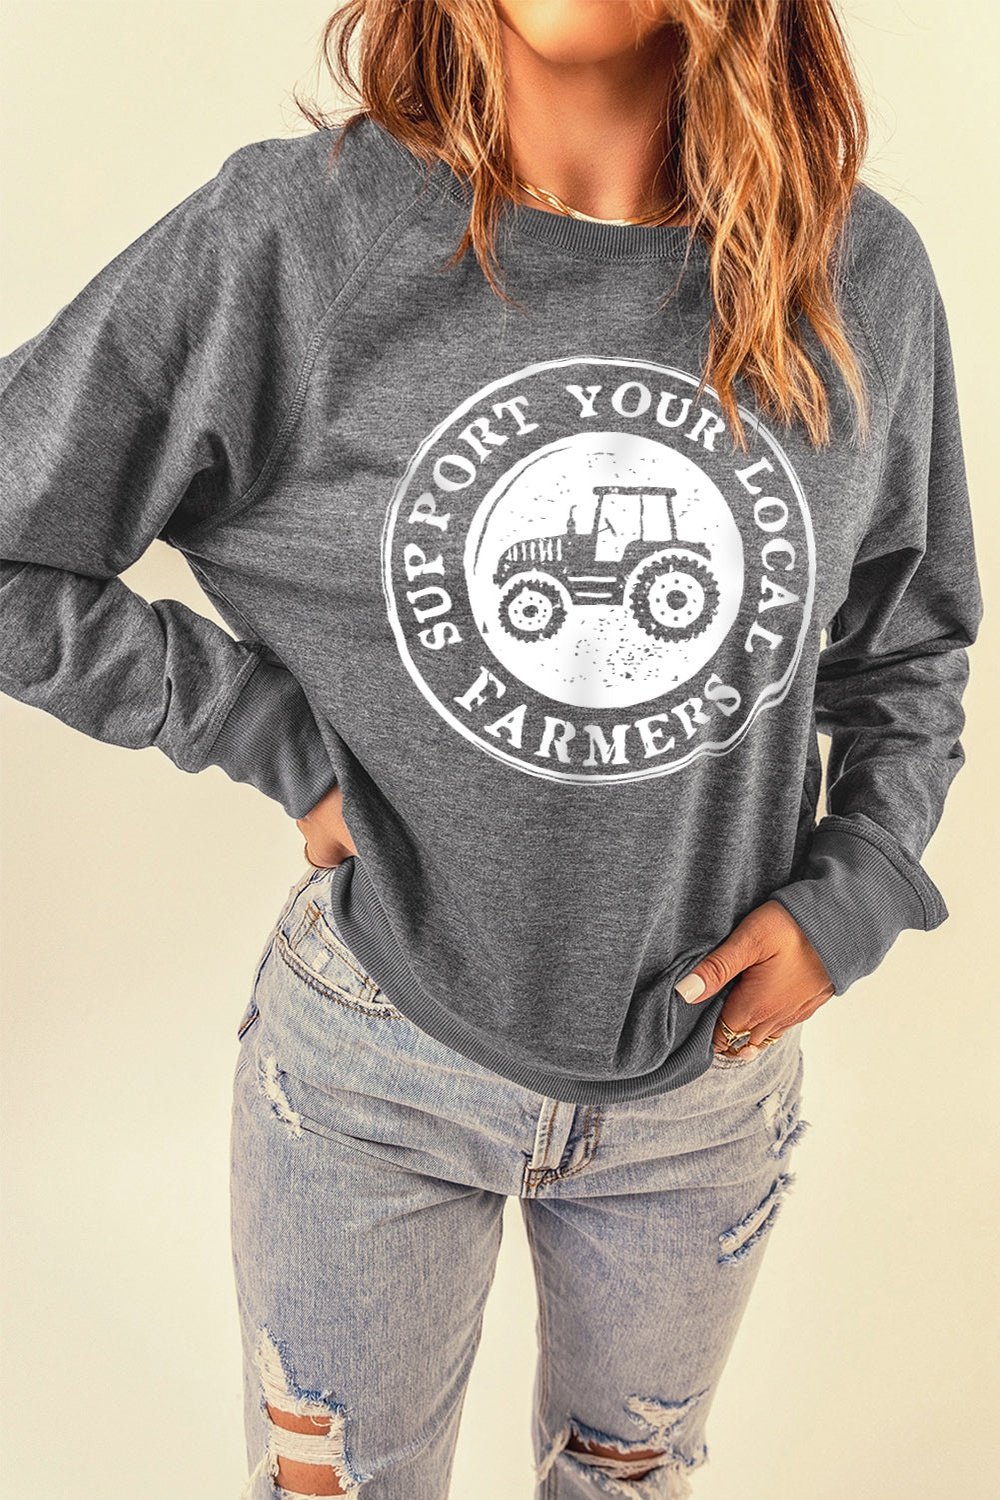 SUPPORT YOUR LOCAL FARMERS Graphic Sweatshirt - Sweatshirts & Hoodies - FITGGINS